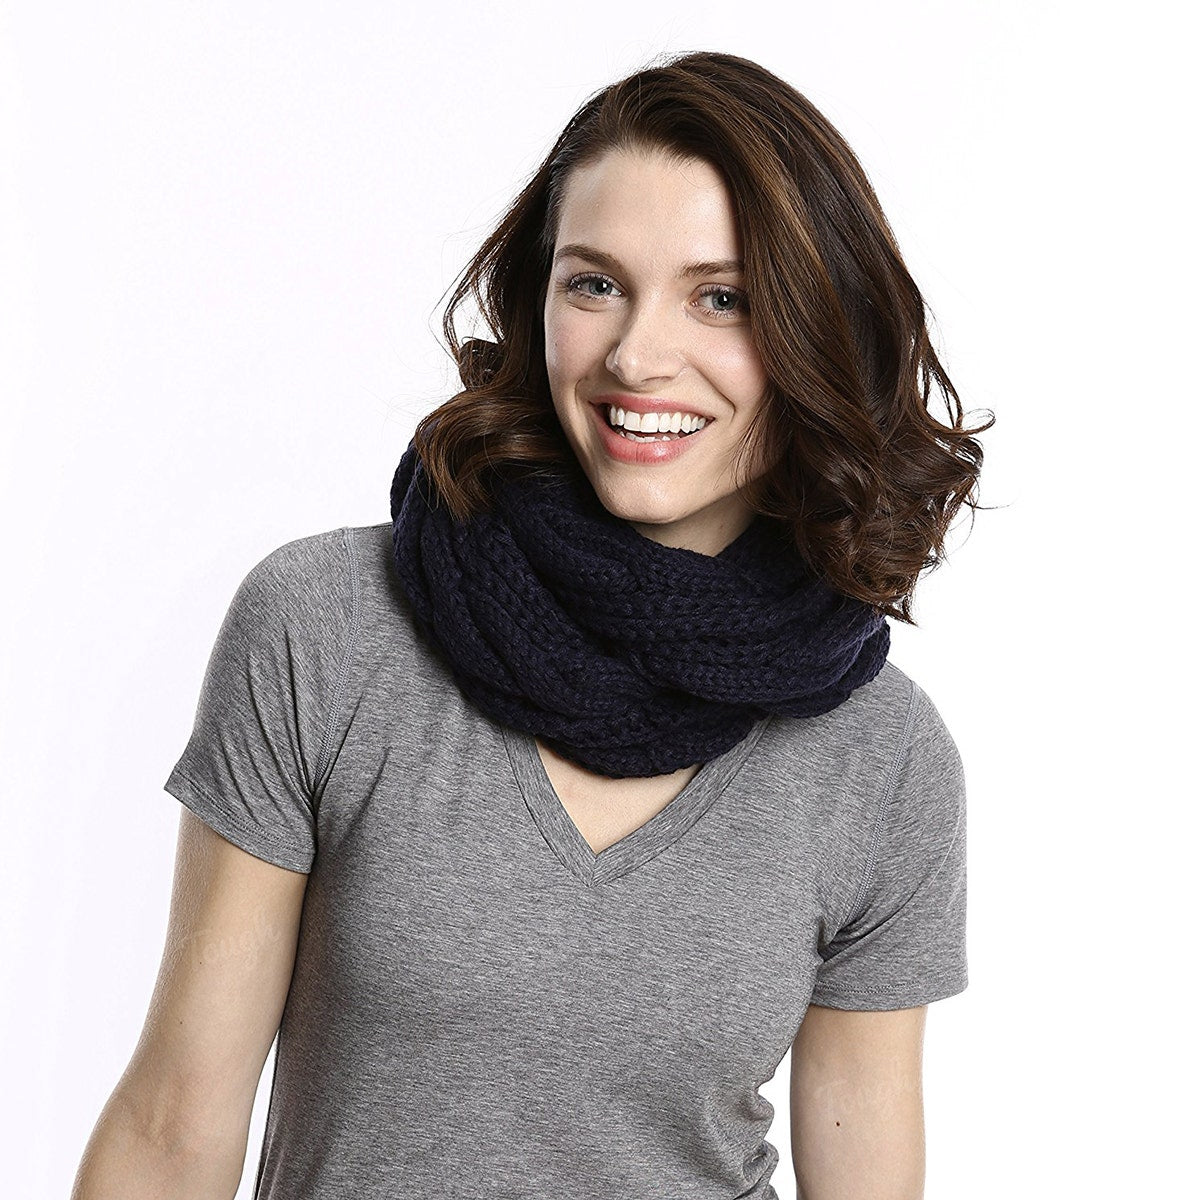 Women’s Cable Knit Infinity Scarf By Tickled Pink – Soft, Versatile